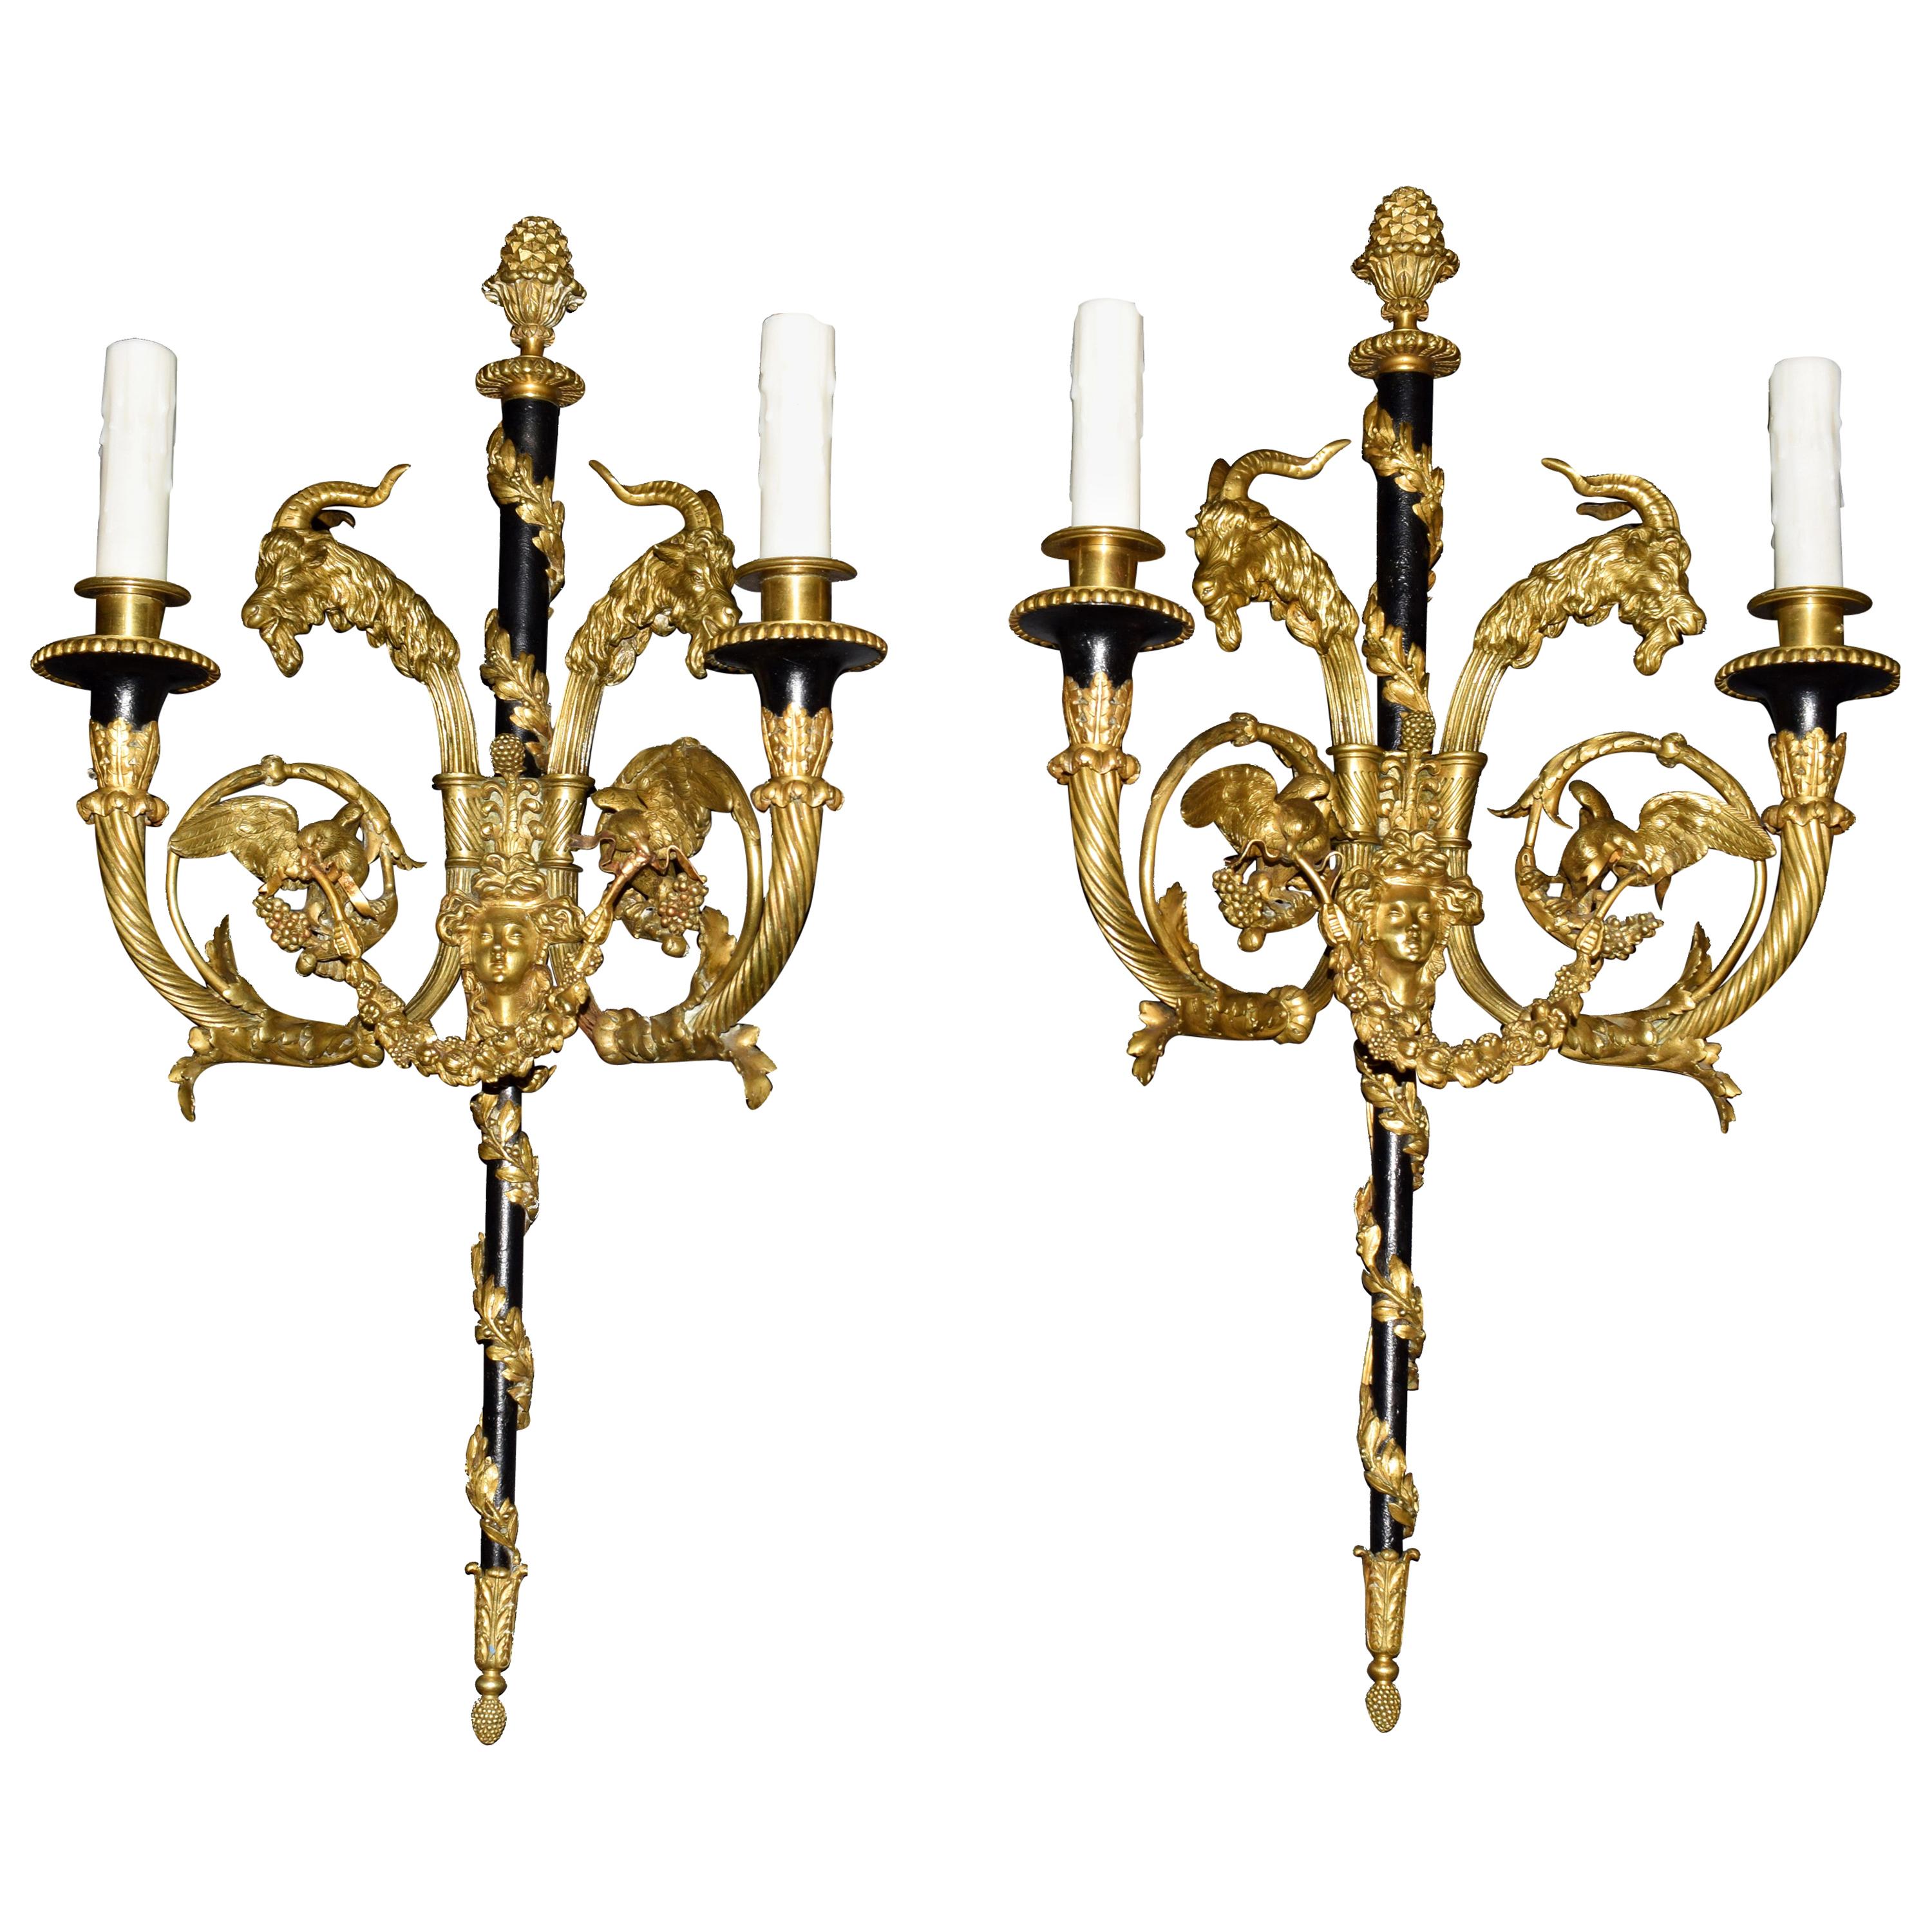 Pair of French Gilt and Enameled Bronze Two-Light Sconces signed Millet a Paris